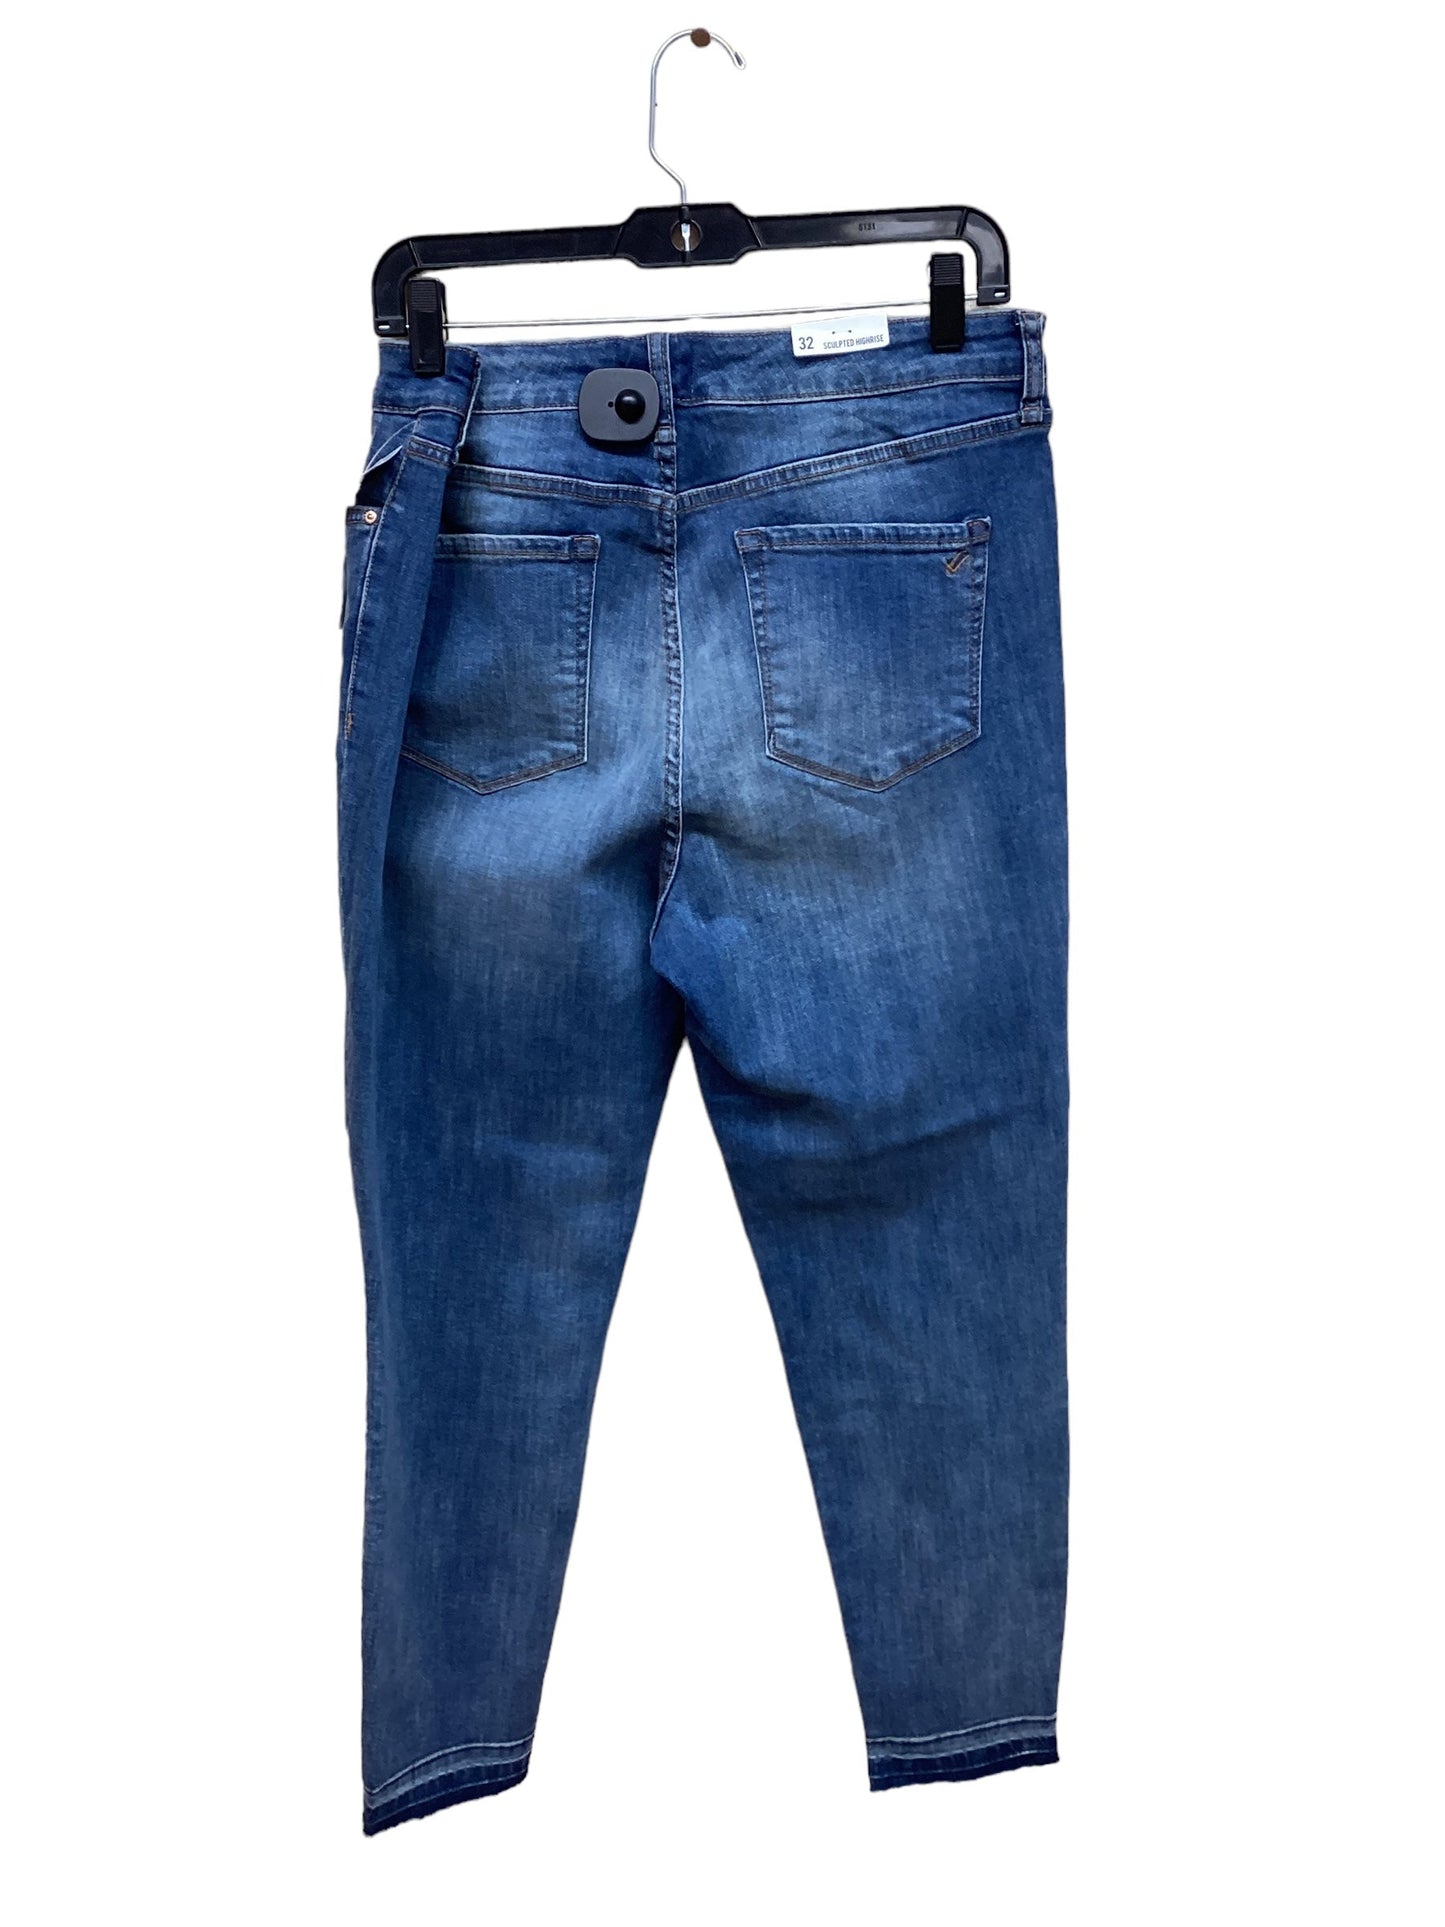 Jeans Straight By William Rast  Size: 14